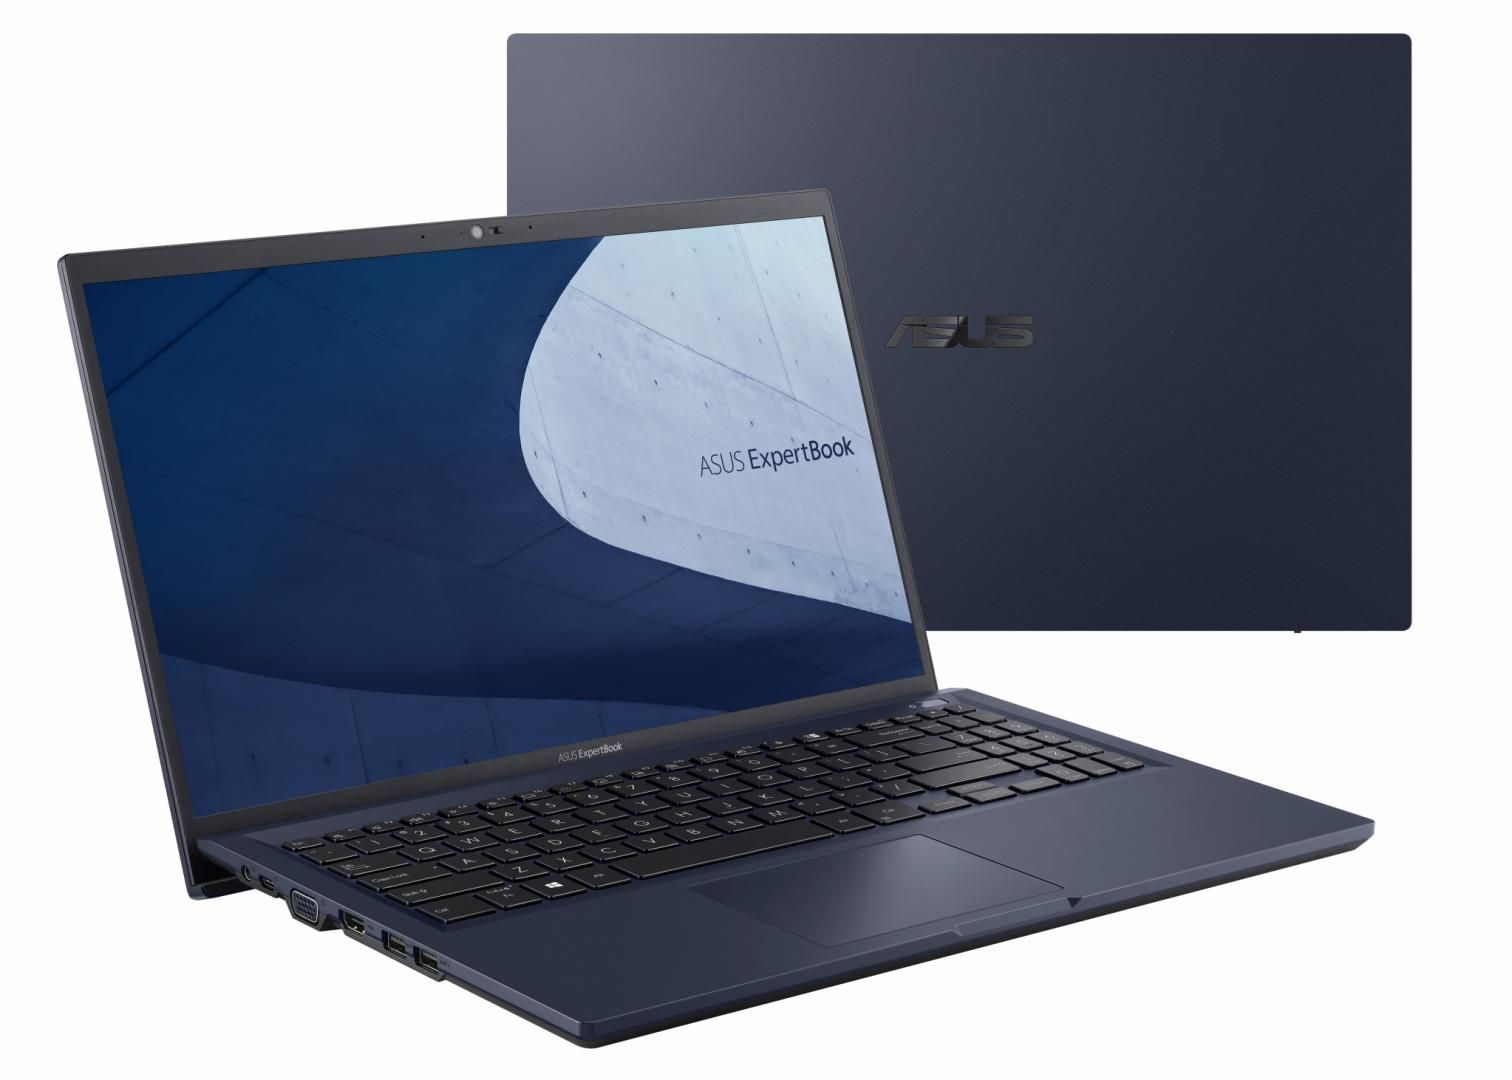 Laptop ASUS Business ExpertBook B1500CEPE-BQ0563R, 15.0-inch, FHD (1920 x 1080) 16:9, Procesor Intel® Core™ i5-1135G7 Processor 2.4 GHz (8M Cache, up to 4.2 GHz, 4 cores), 8GB DDR4, 512GB SSD, NVIDIA® GeForce® MX330, Windows 10 Pro, Star Black_5